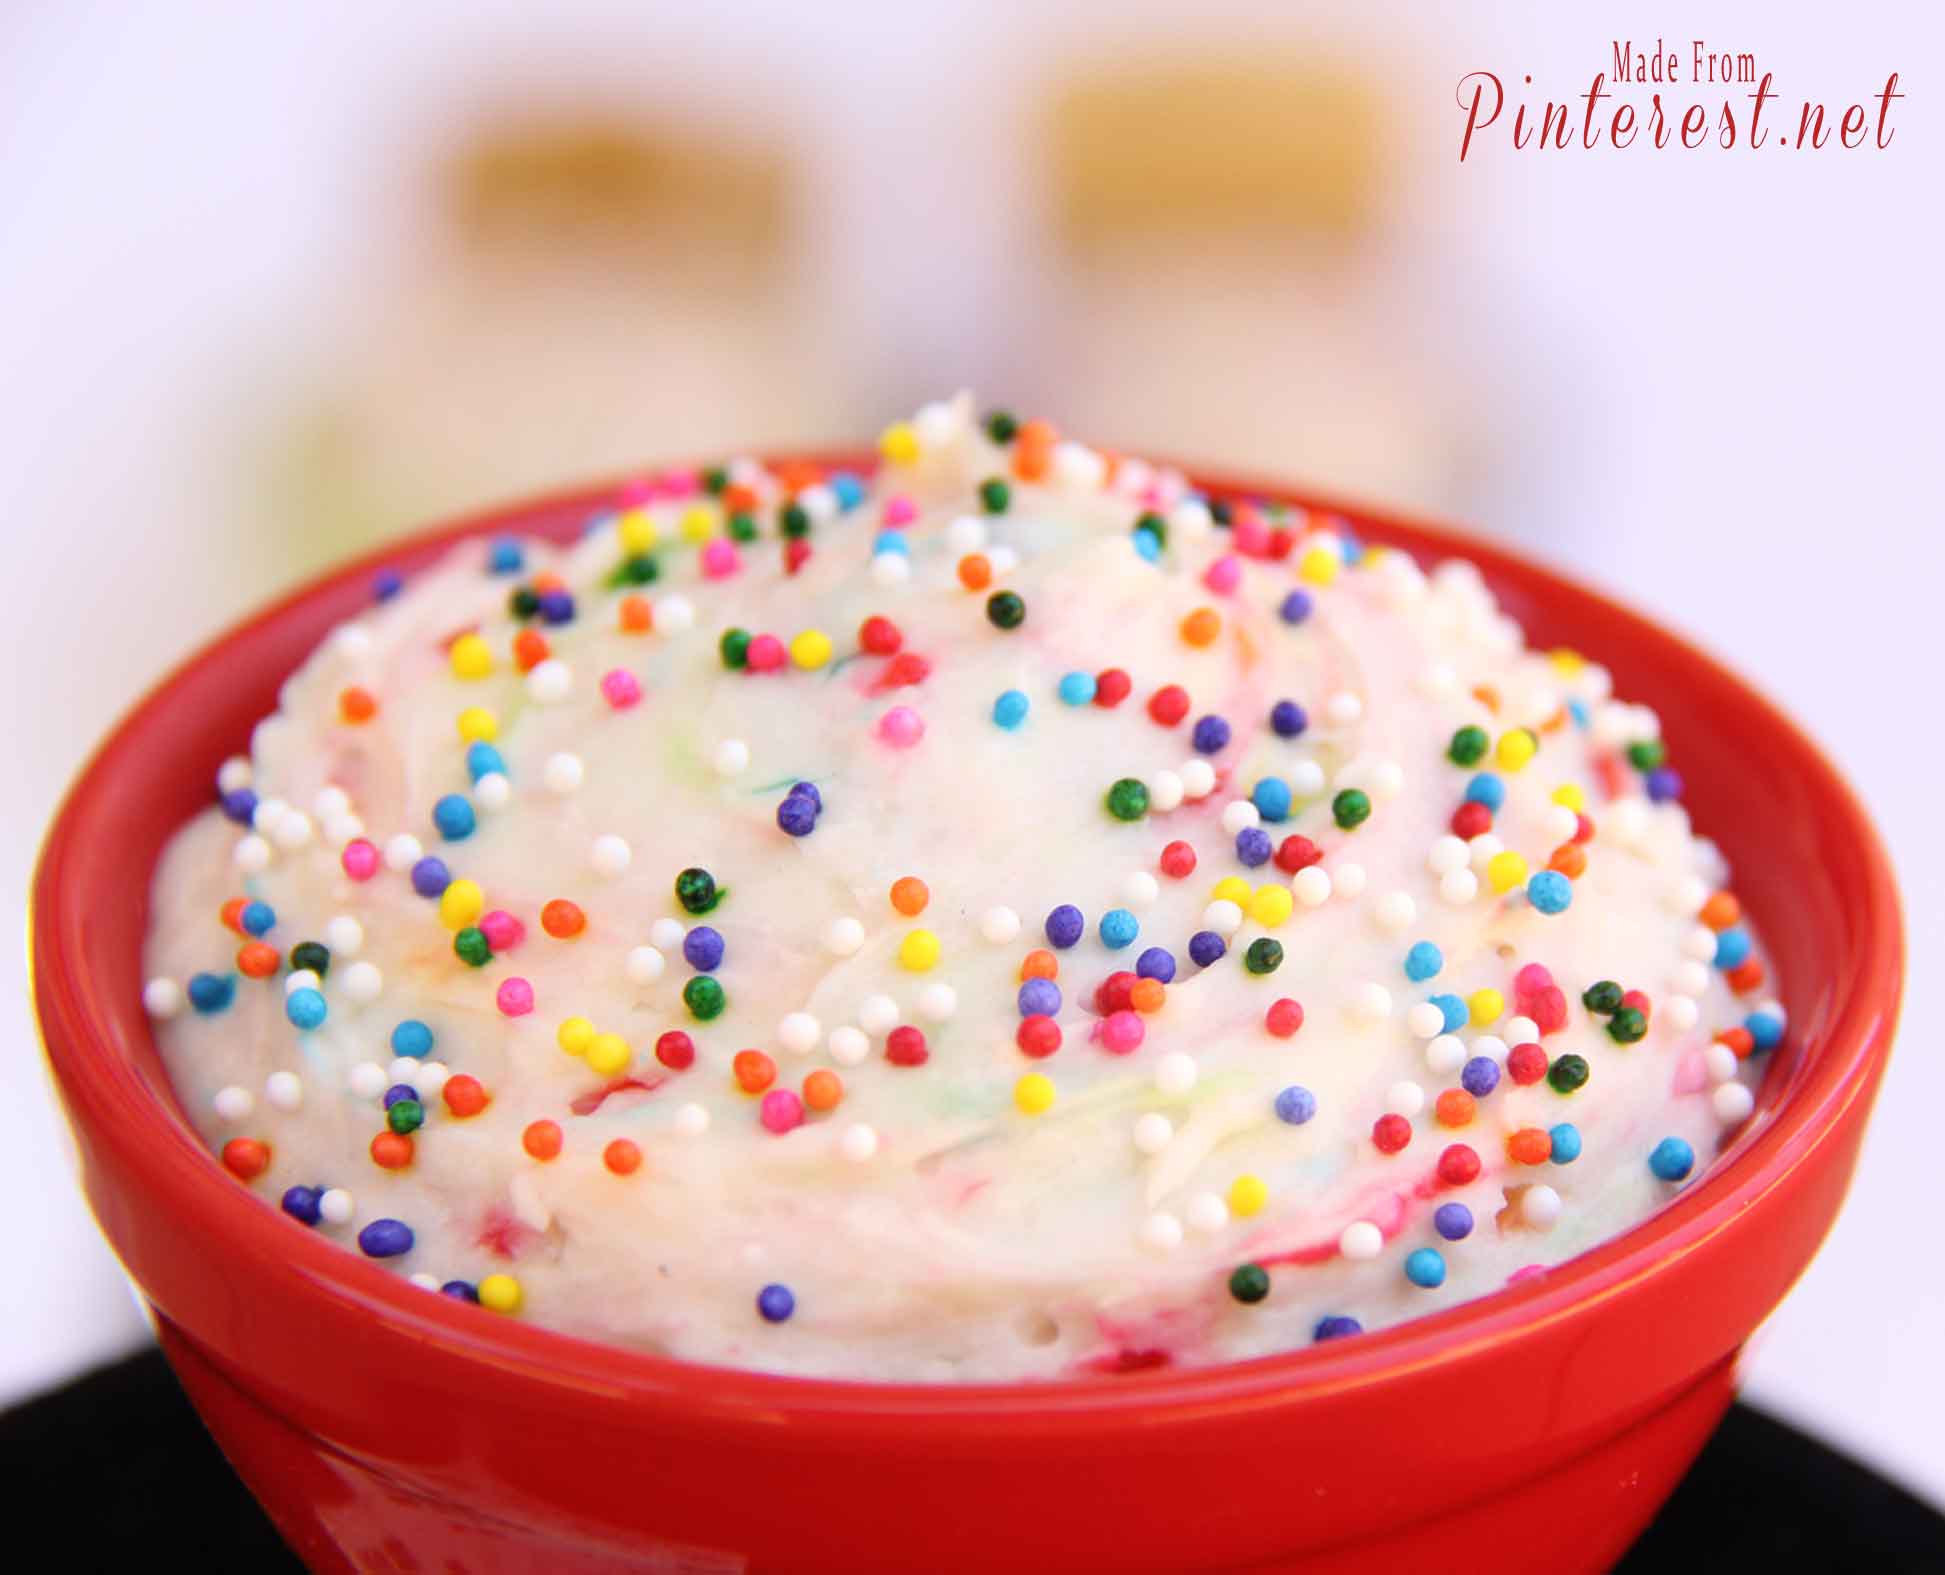 Skinny Funfetti Cake Dip - tested and reviewed by one of the 3 crazy sisters at https://www.thisgrandmaisfun.com